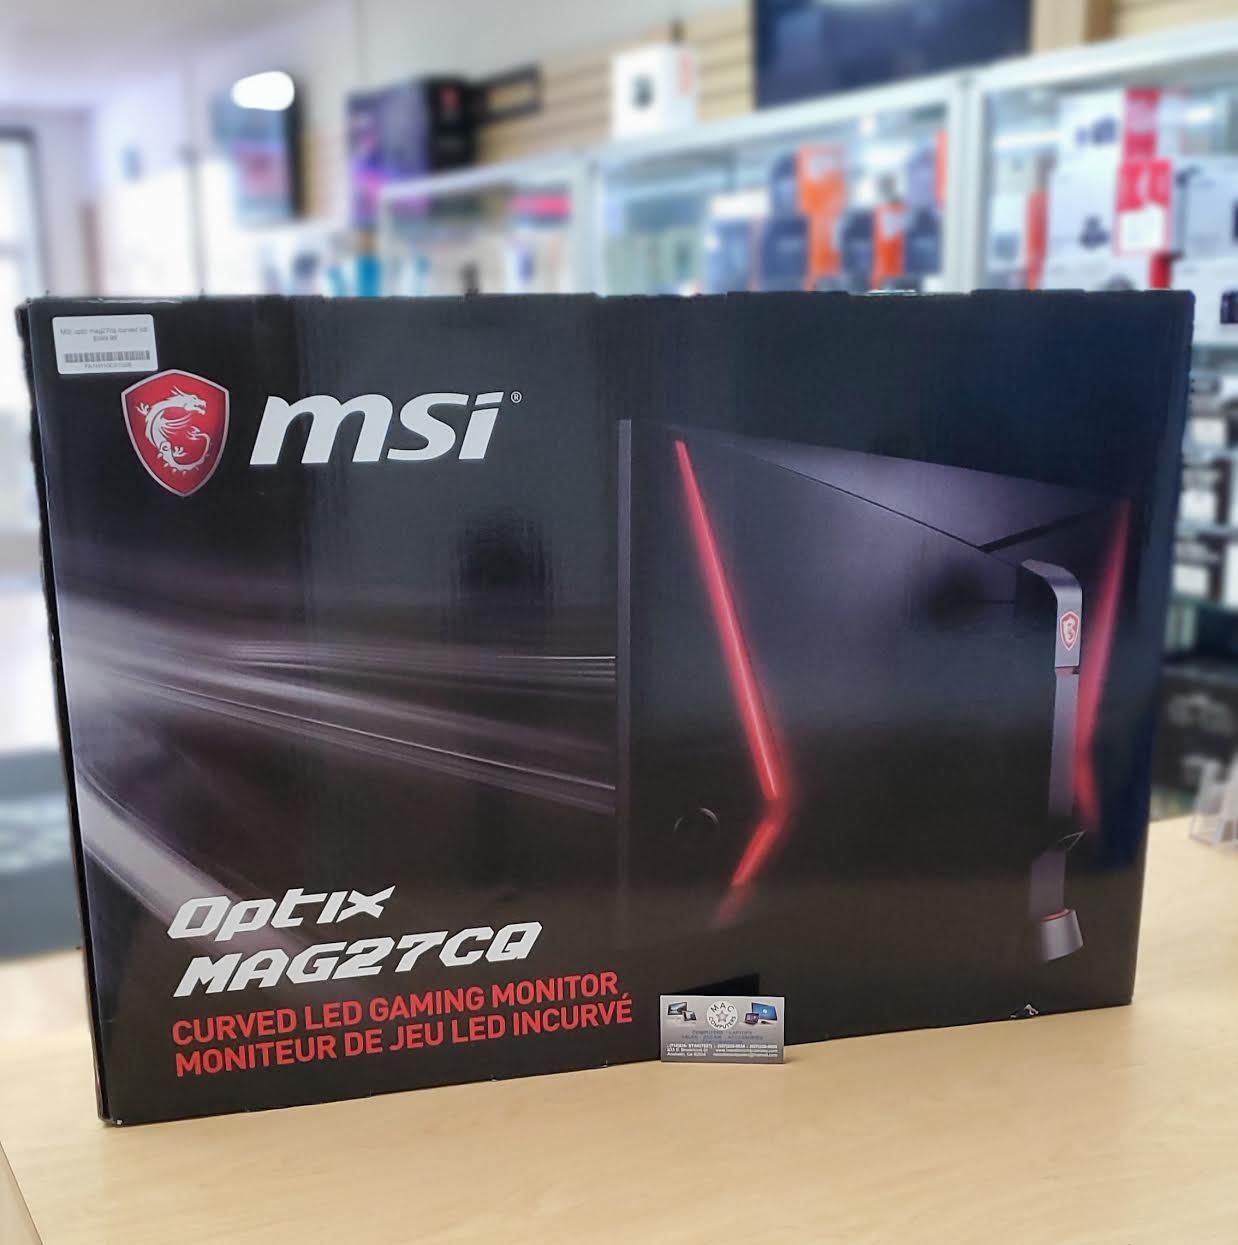 MSI 27" Optix MAG27CQ curved gaming monitor (No credit needed payment option plan! get your items TODAY!)